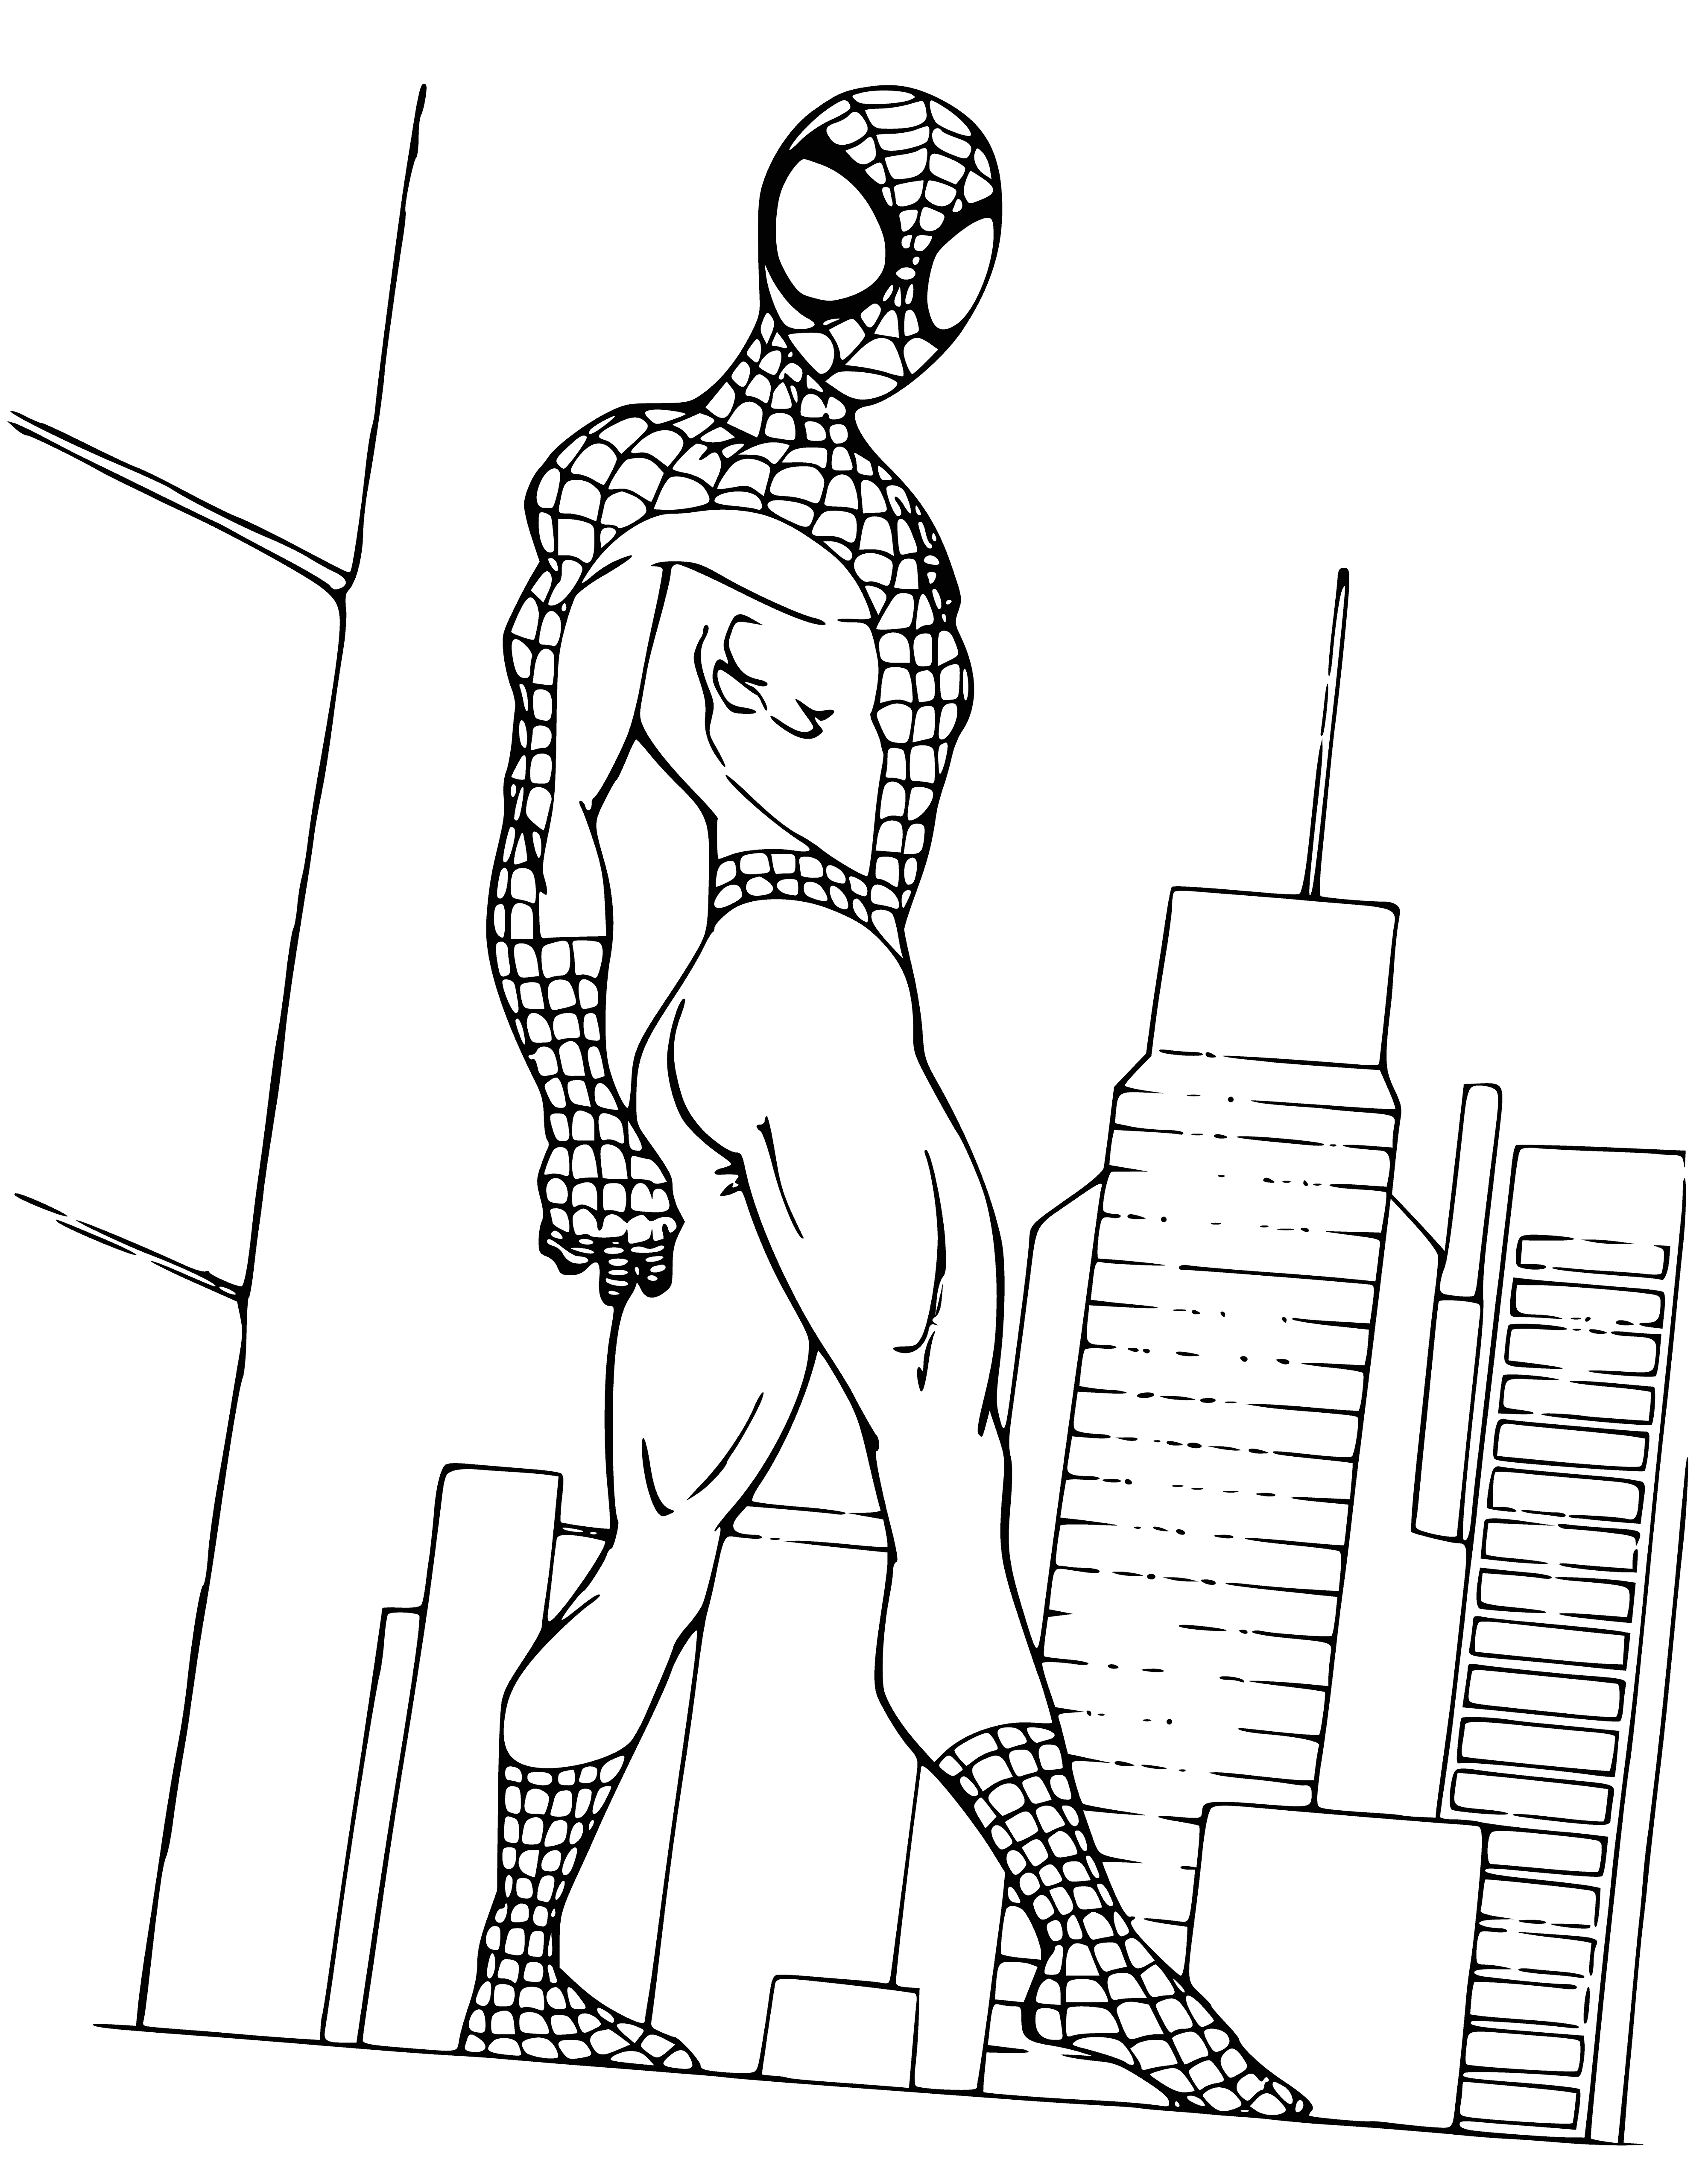 Spider-Man coloring page